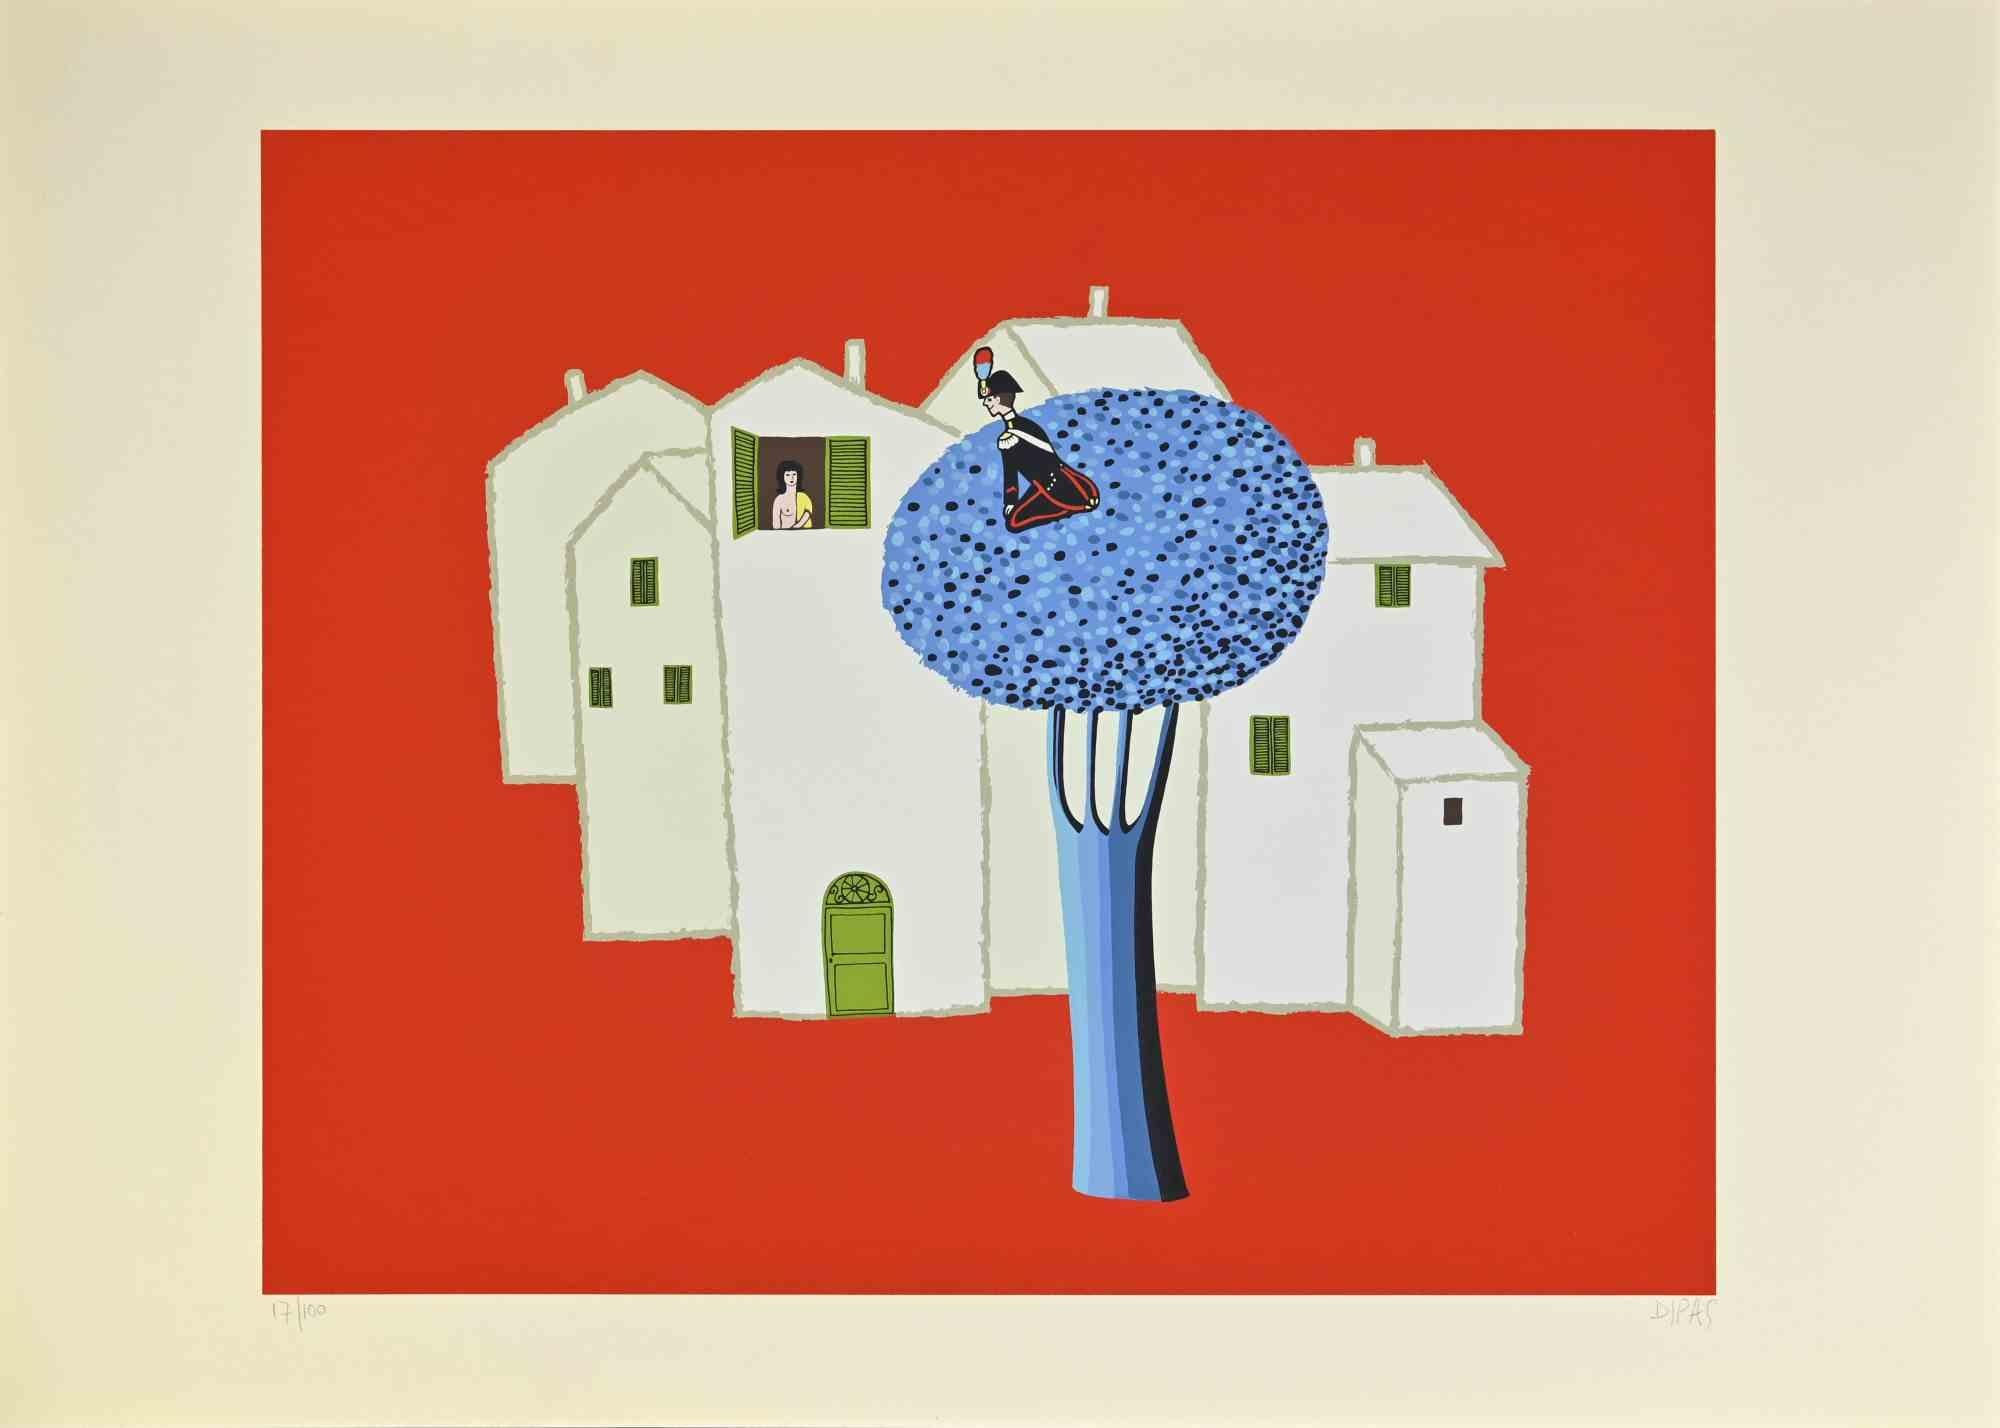 On the Blue Tree - Screen Print by Dipas - 1970s